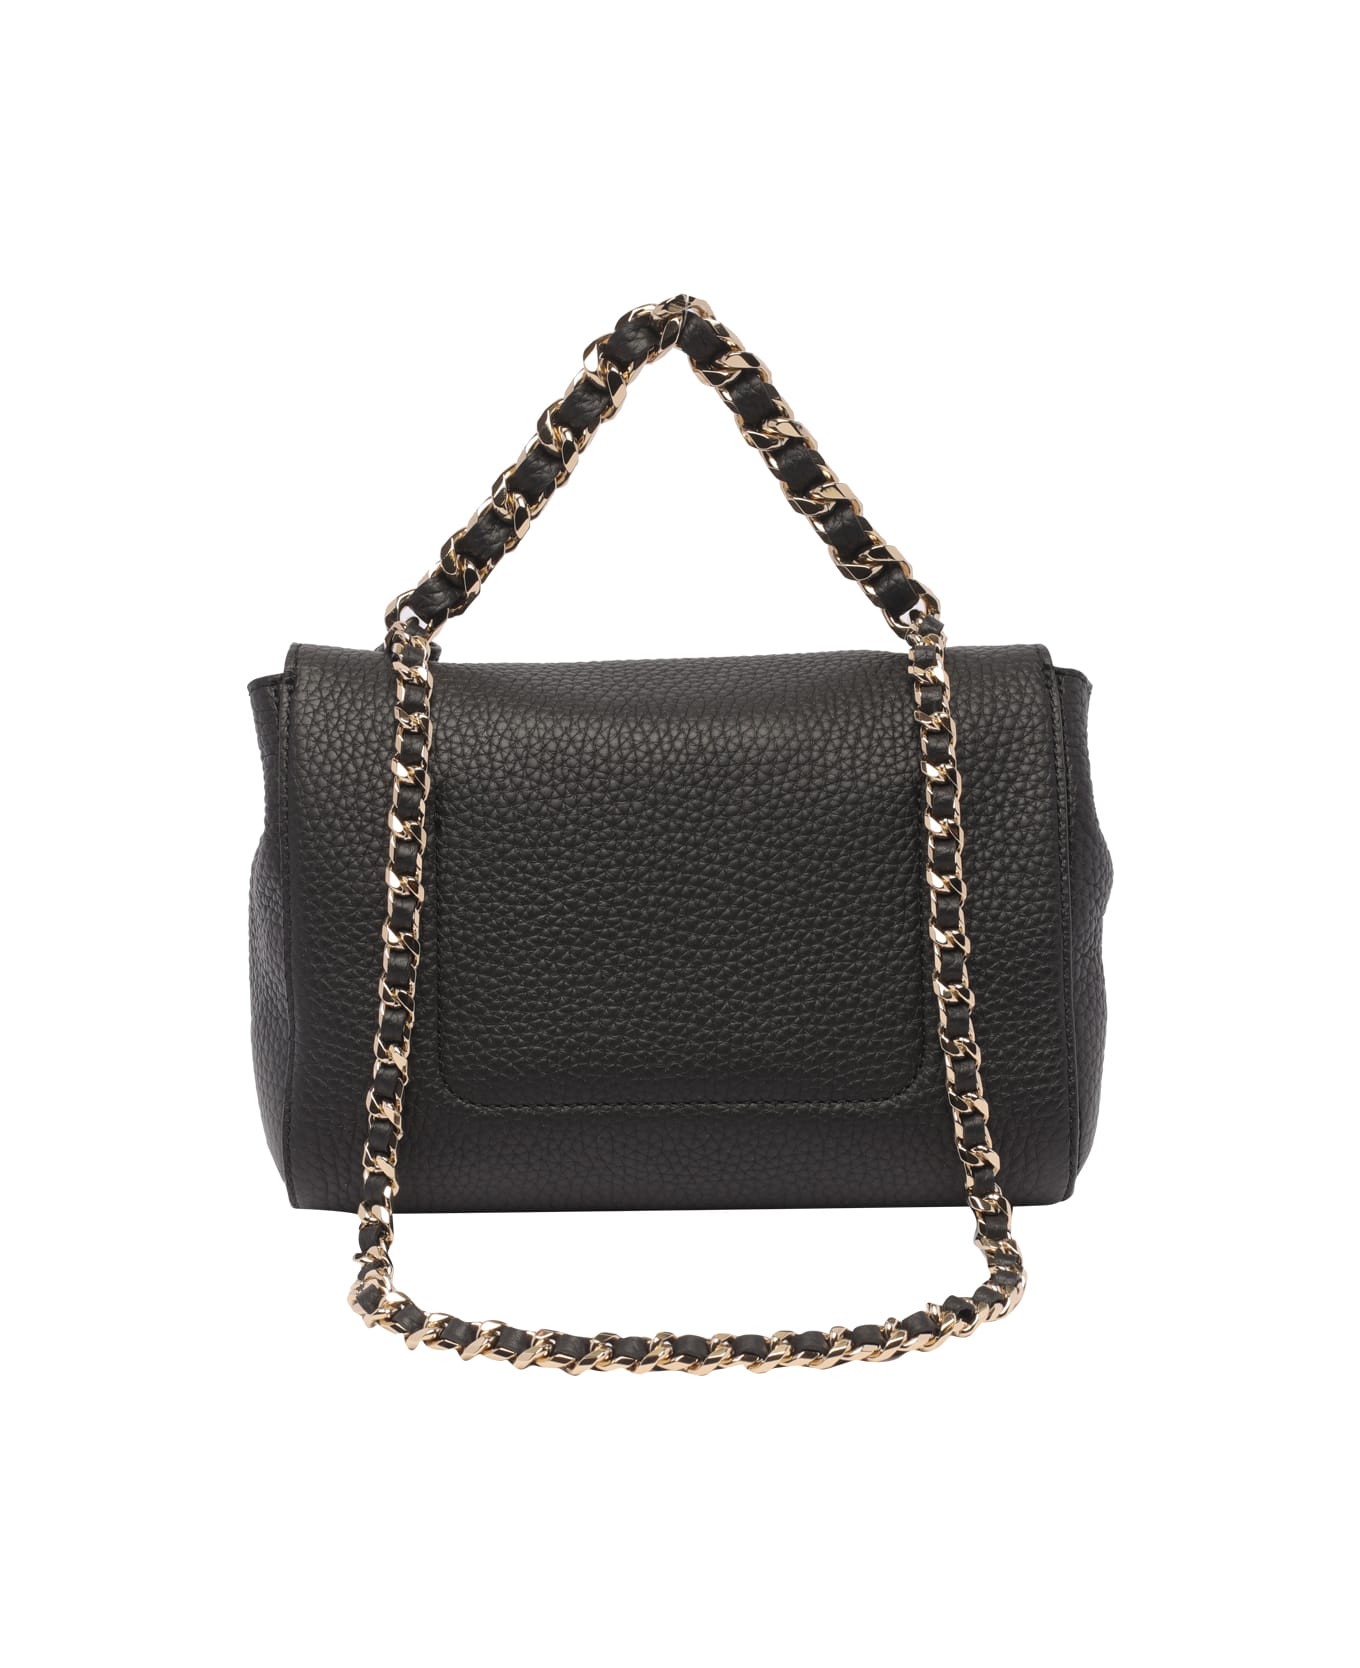 Mulberry Lily Top Handle Crossbody Bag - Black トートバッグ